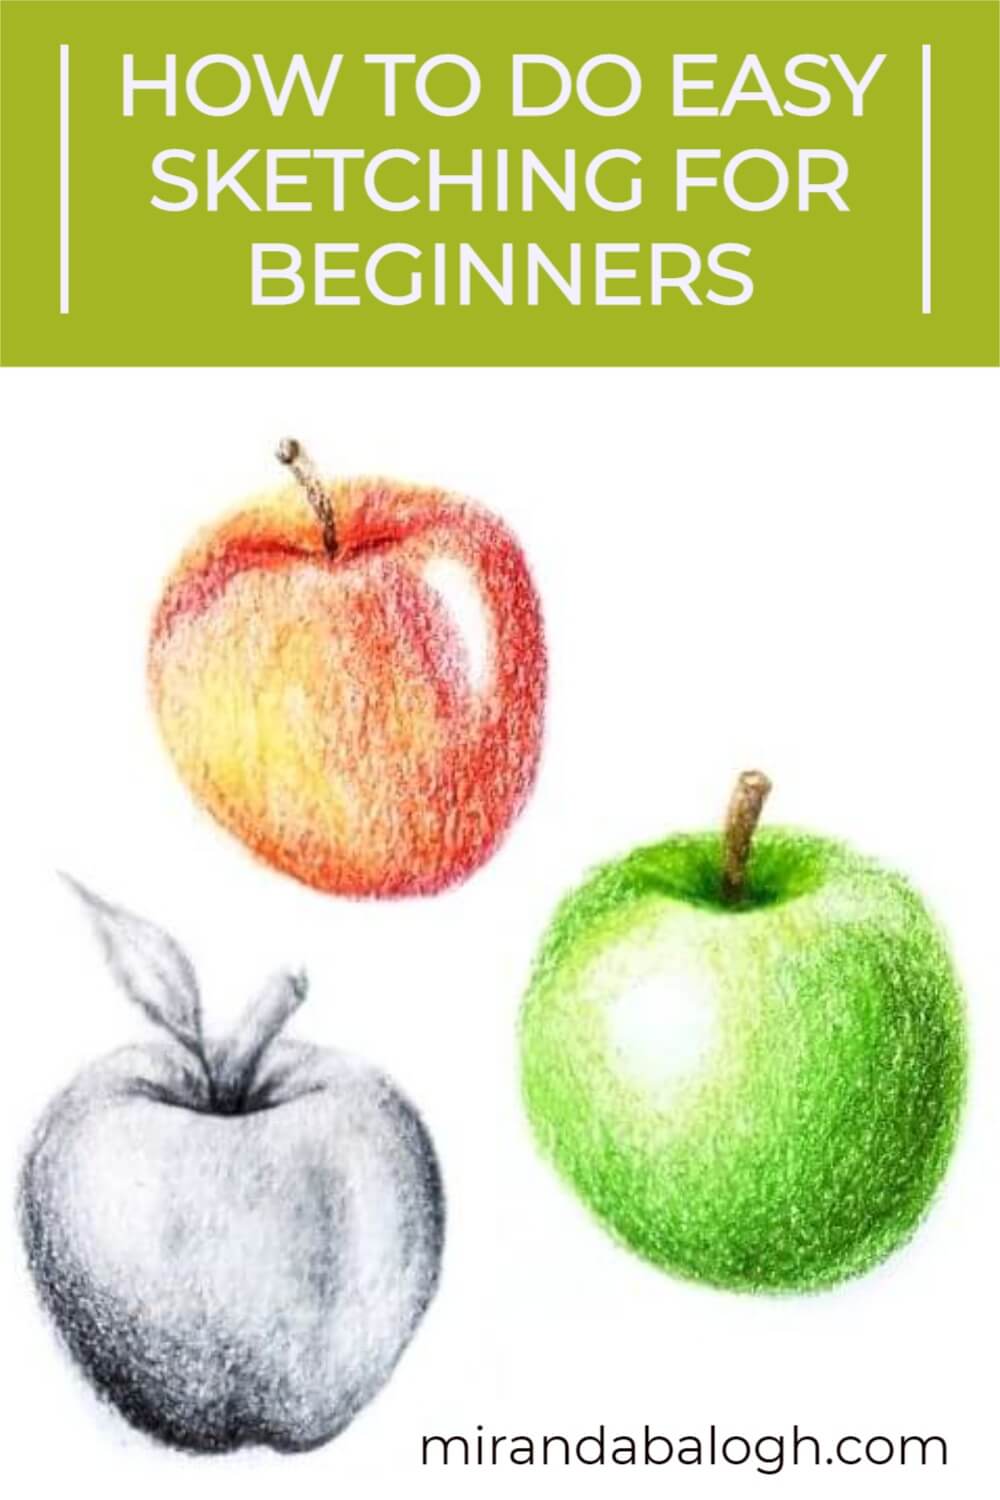 How To Do Easy Sketching For Beginners (4 Awesome Tutorials